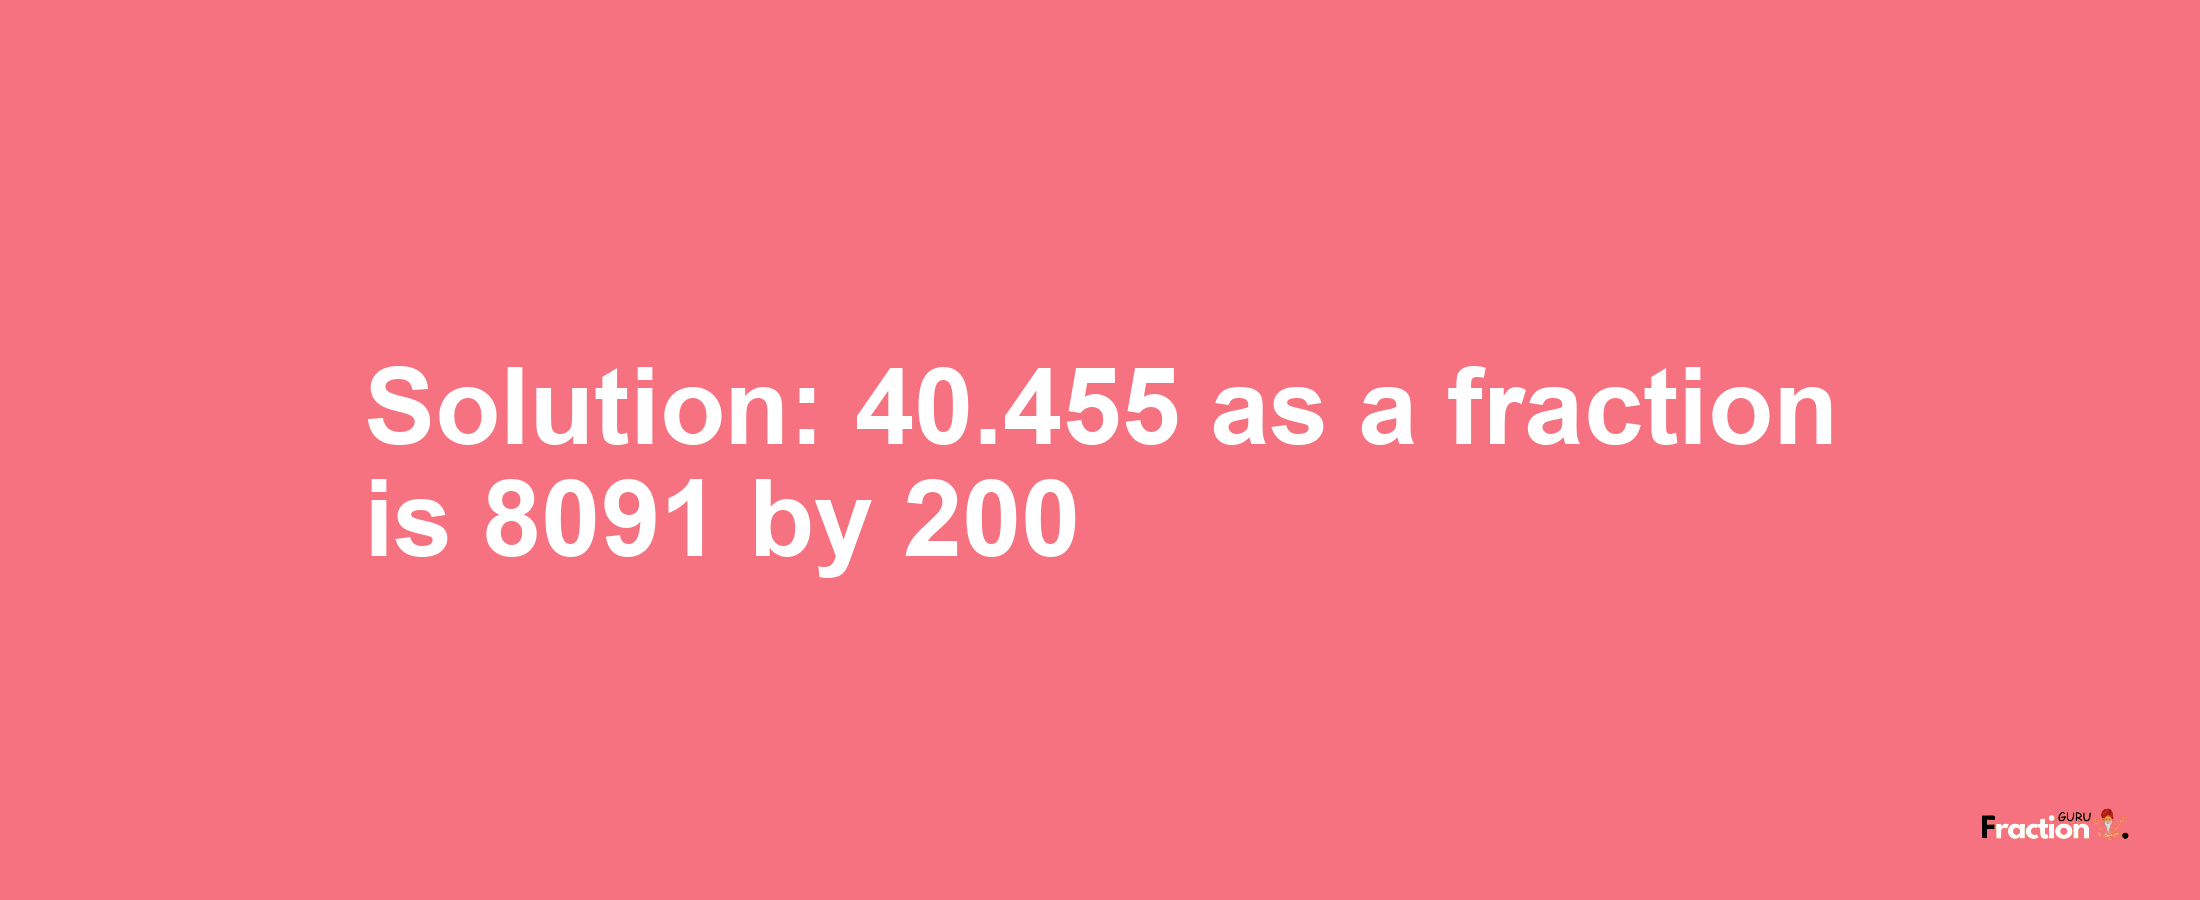 Solution:40.455 as a fraction is 8091/200